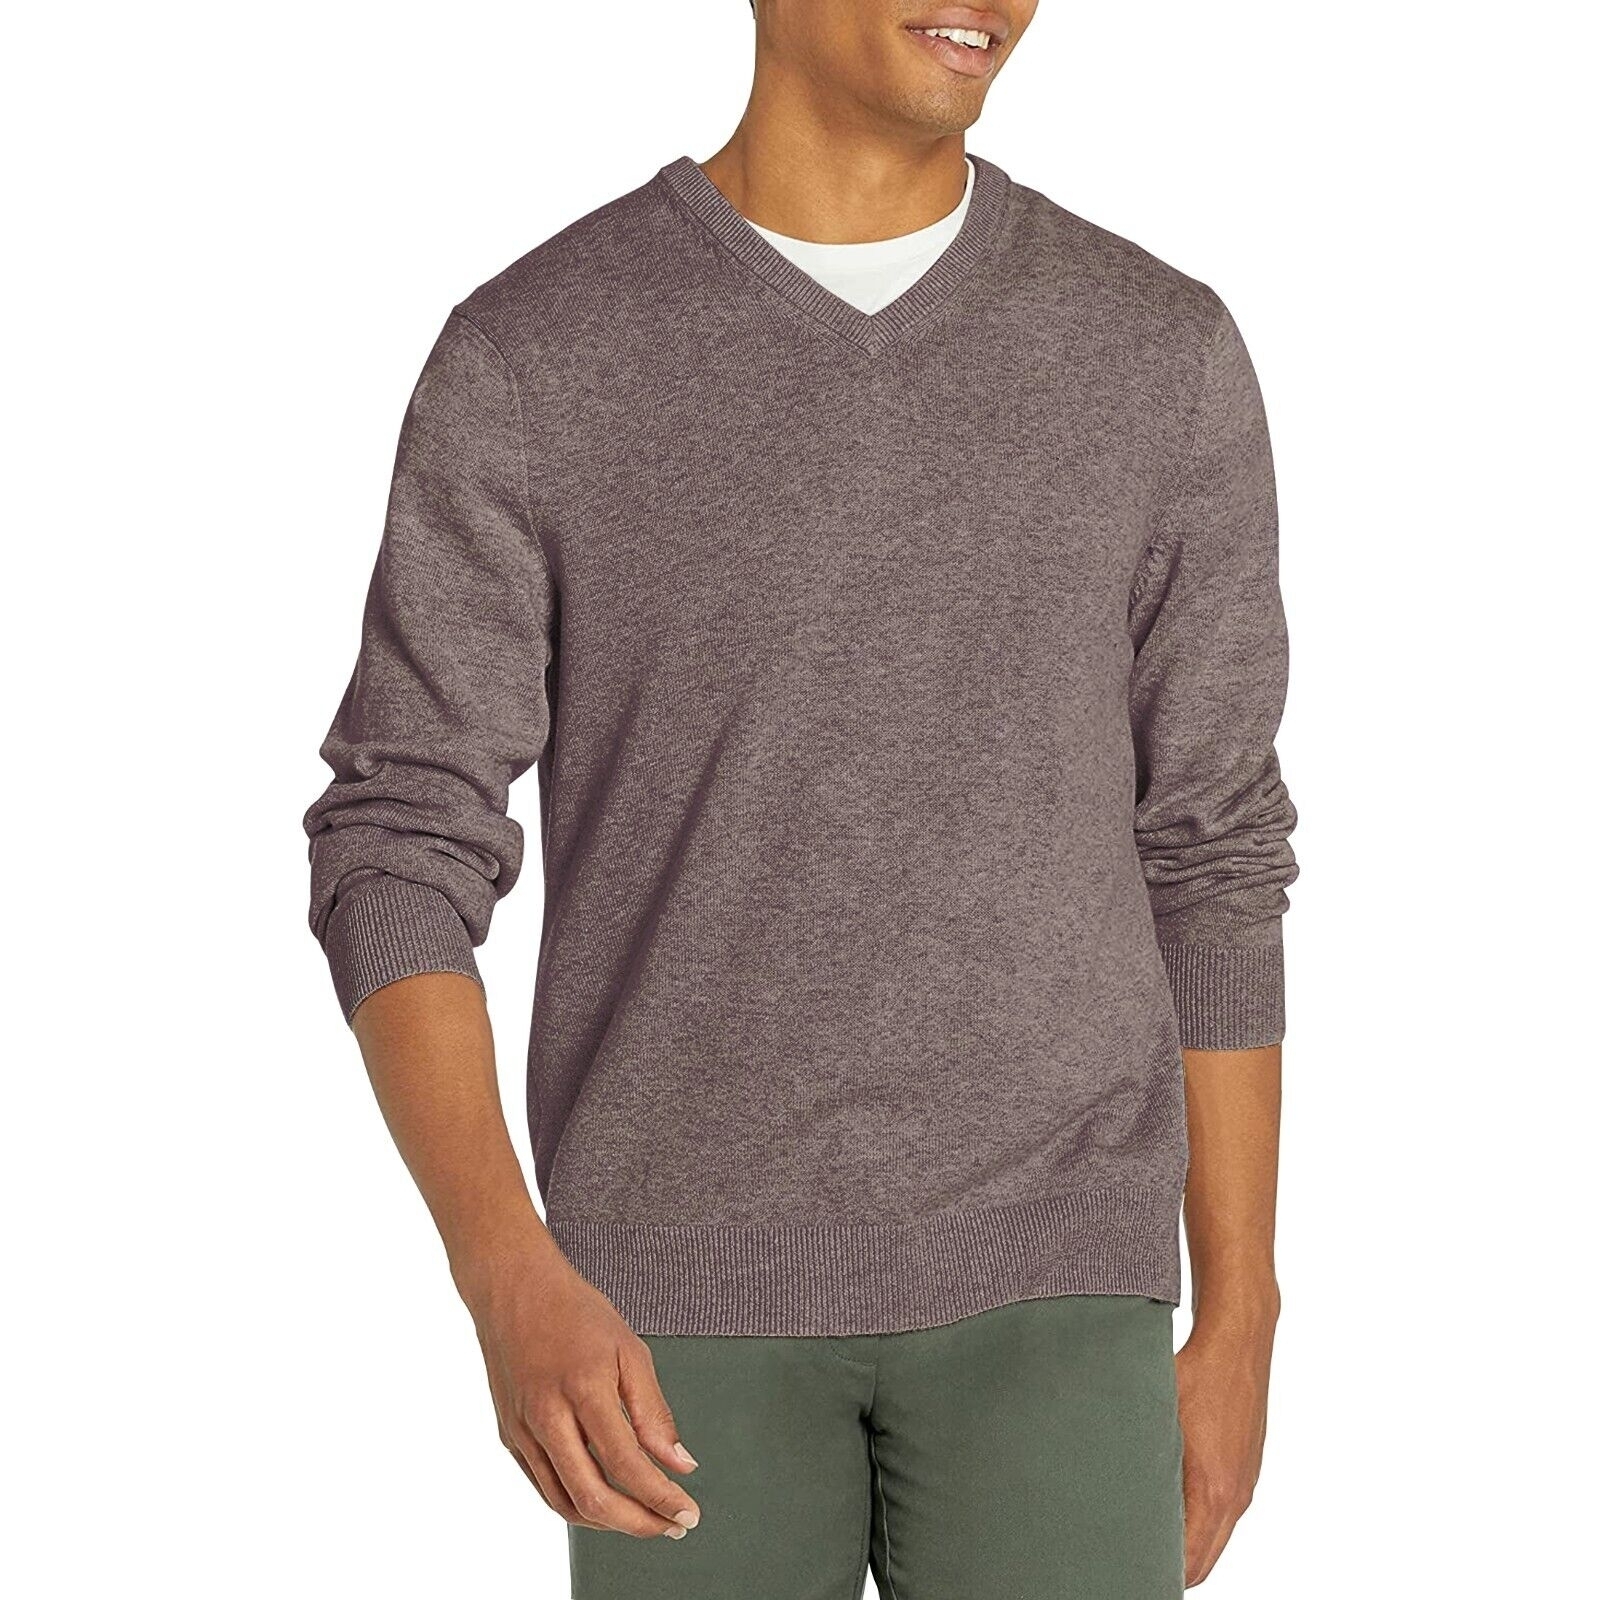 Men's Casual Ultra-Soft Slim Fit Warm Knit Pullover V-Neck Sweater For Winter - Brown, Medium